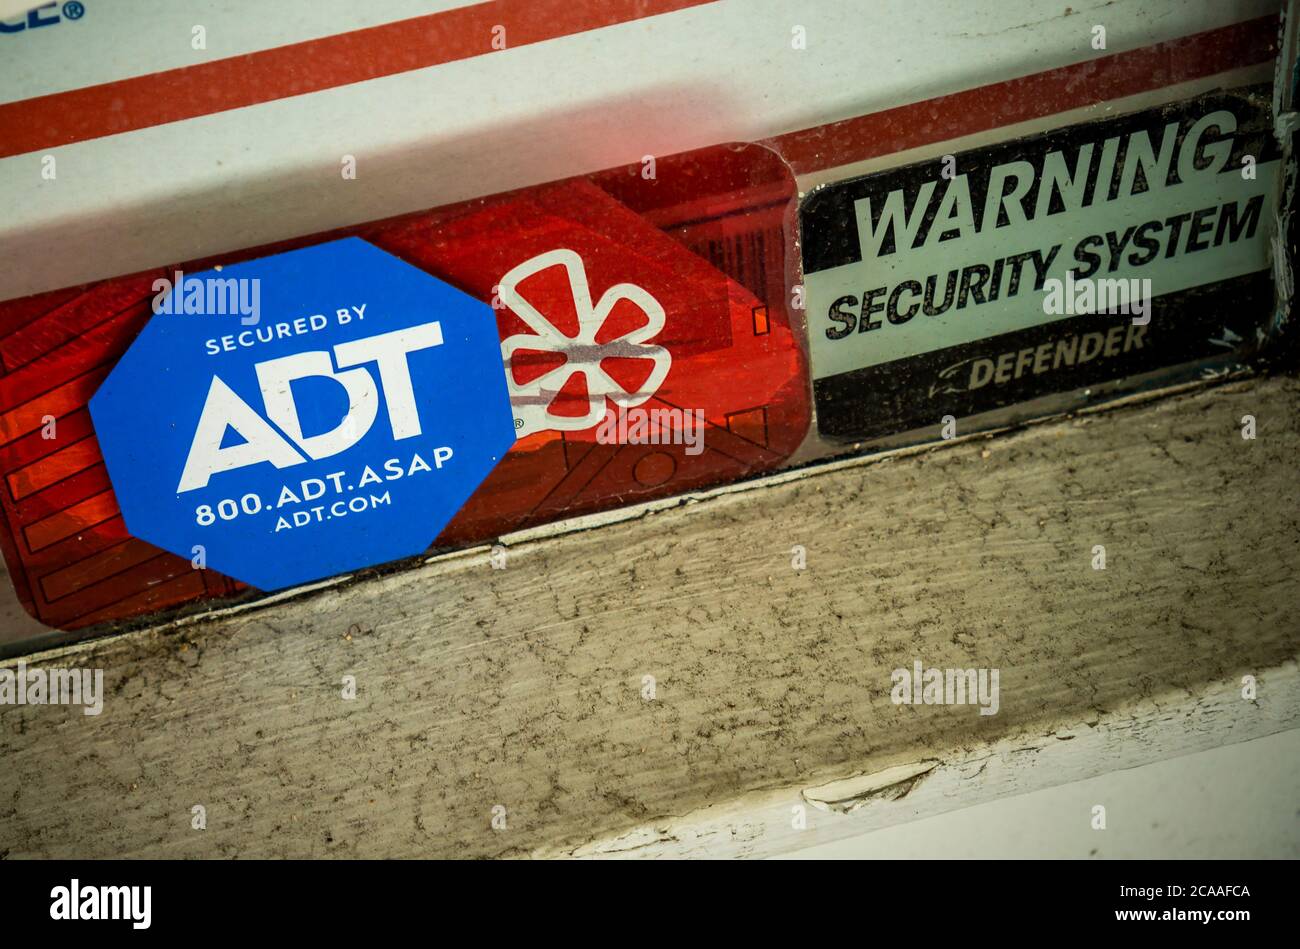 A decal informing would-be burglars that a store in Greenwich Village in New York is protected by the security firm ADT is seen on Monday, August 3, 2020. Google announced it has bought a 6.6% stake in ADT Inc., in a $450 million deal. ADT will be able to service Google’s Nest home security. (© Richard B. Levine) Stock Photo